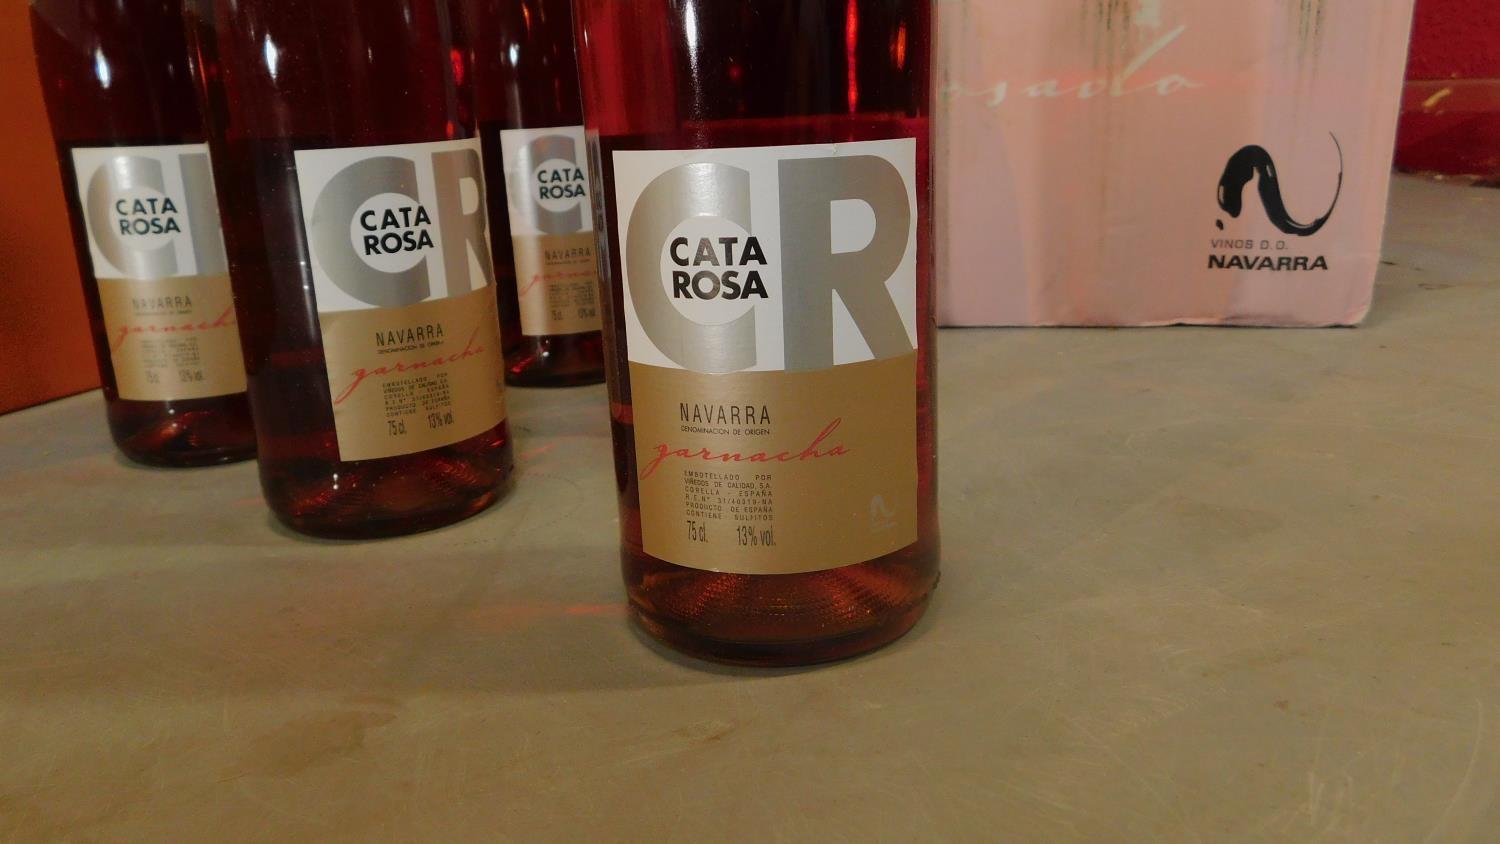 Six bottles of BES - Can Rich Syrah 2011 and eleven bottles of Cata Rosa Navarra 2012. (17) - Image 2 of 2